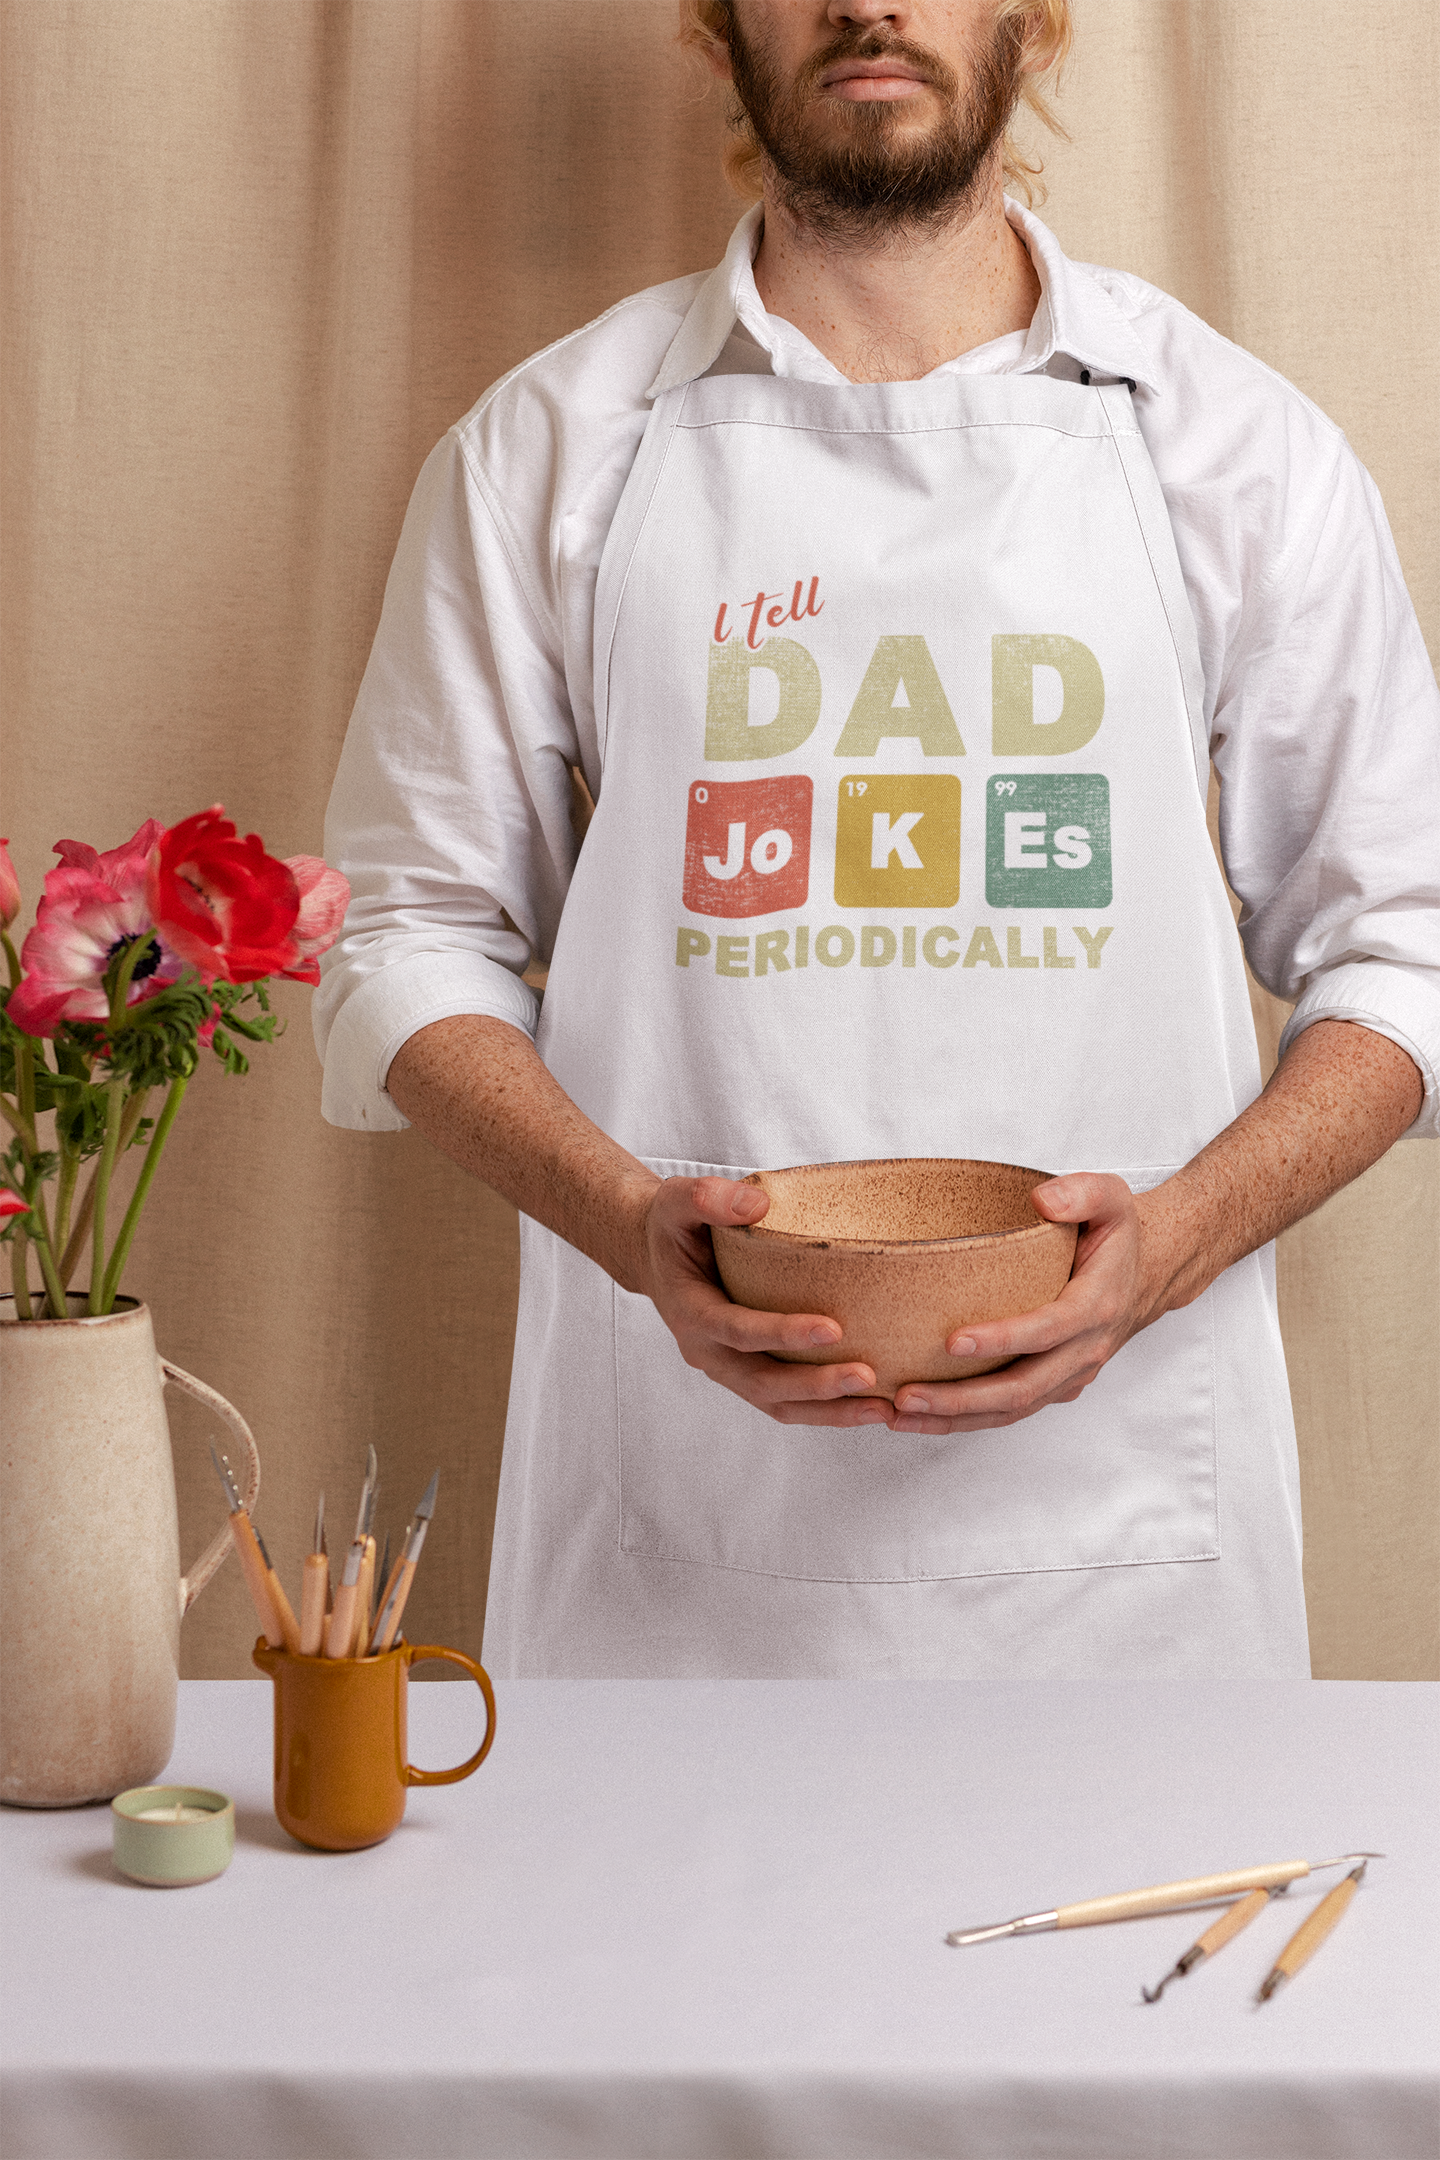 Dad Jokes Apron great gift for grilling  and Father's Day!: White